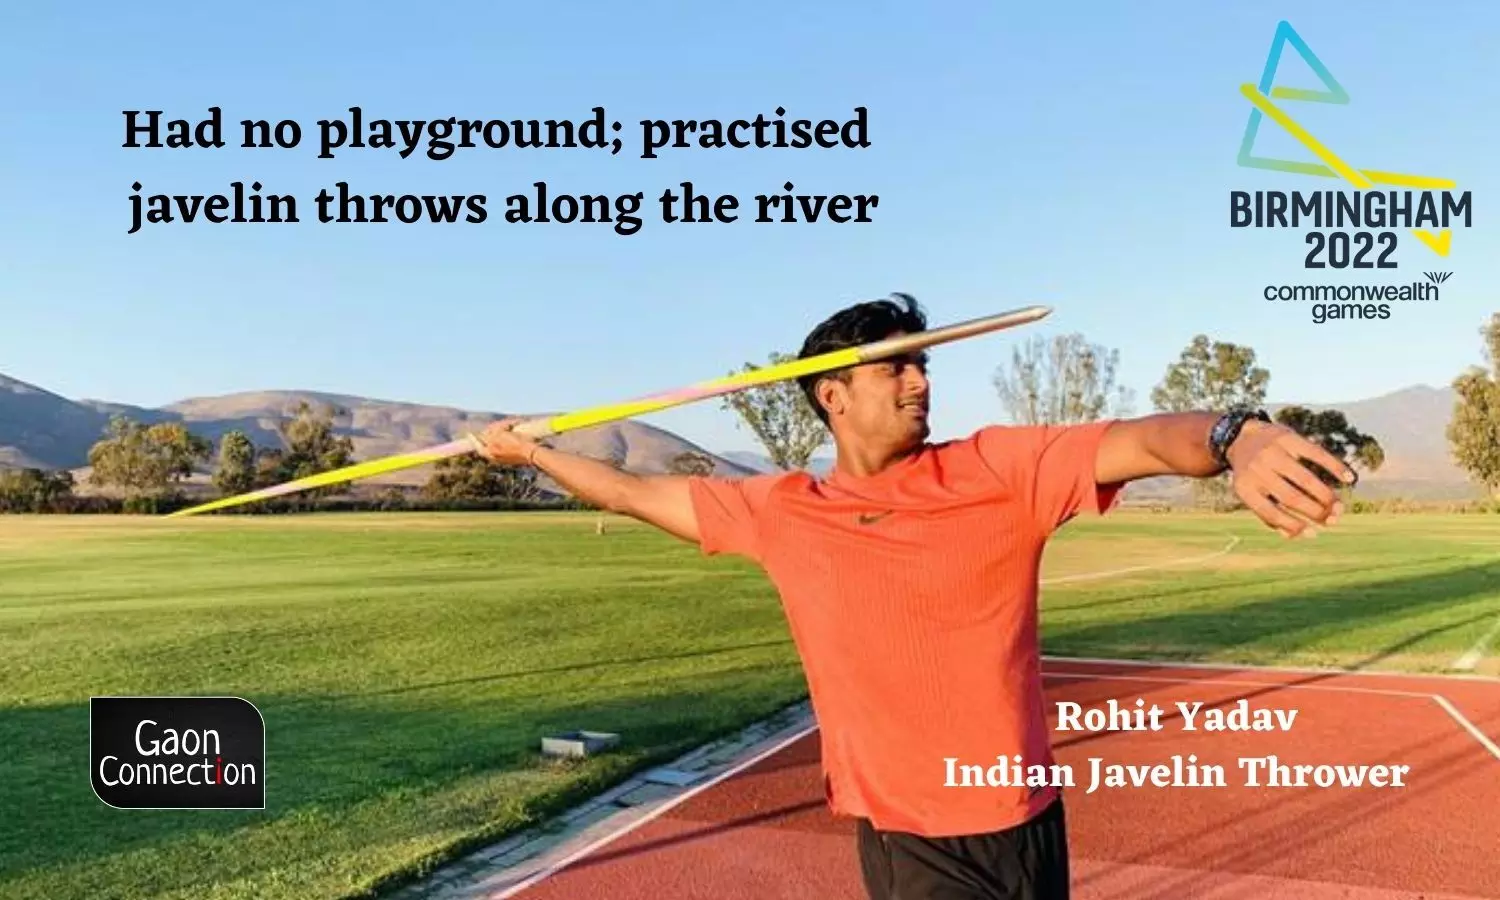 We had no playground; our father cleared out a stretch along the river for us to practise javelin throws